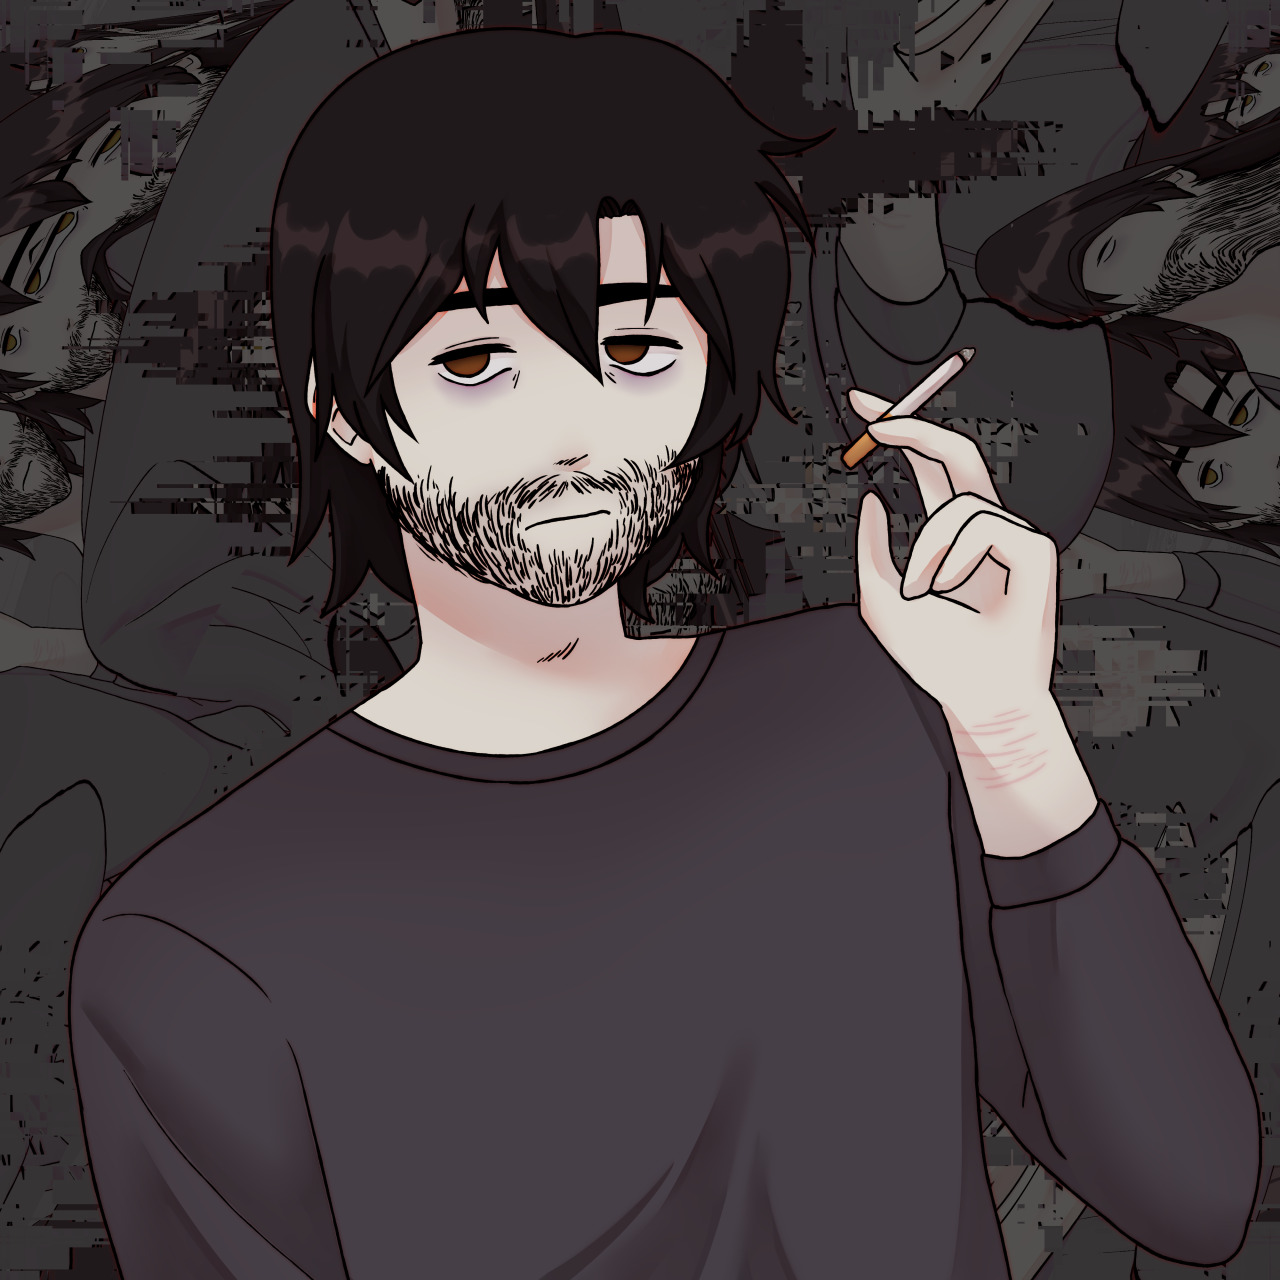 i don’t like how this turned out at all so here. just take it as it is #oc#väino kõiv#smoking#scars#my art